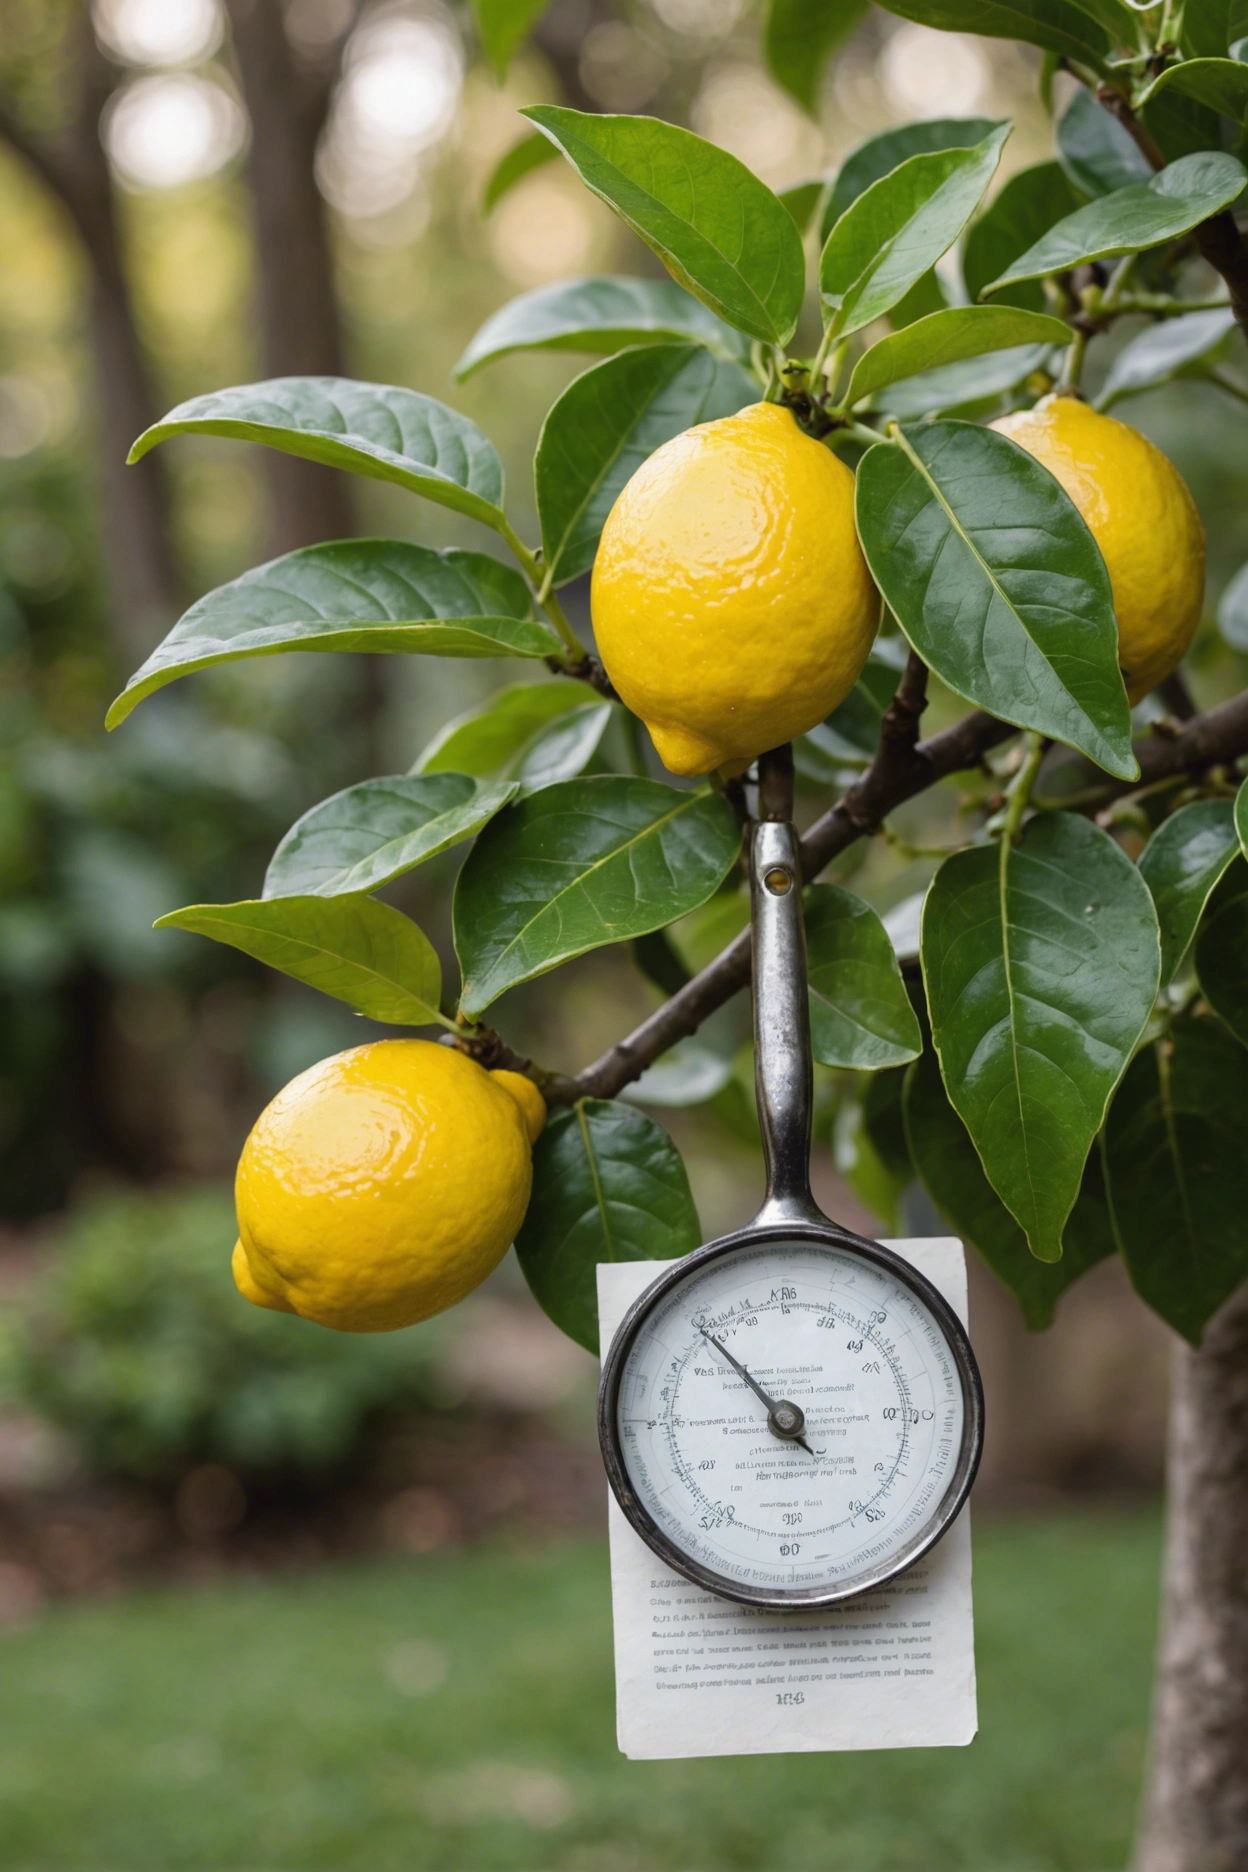 "Close-up of a lemon tree with curling, discolored leaves, magnifying glass and guidebook on citrus leaf curl in the background."